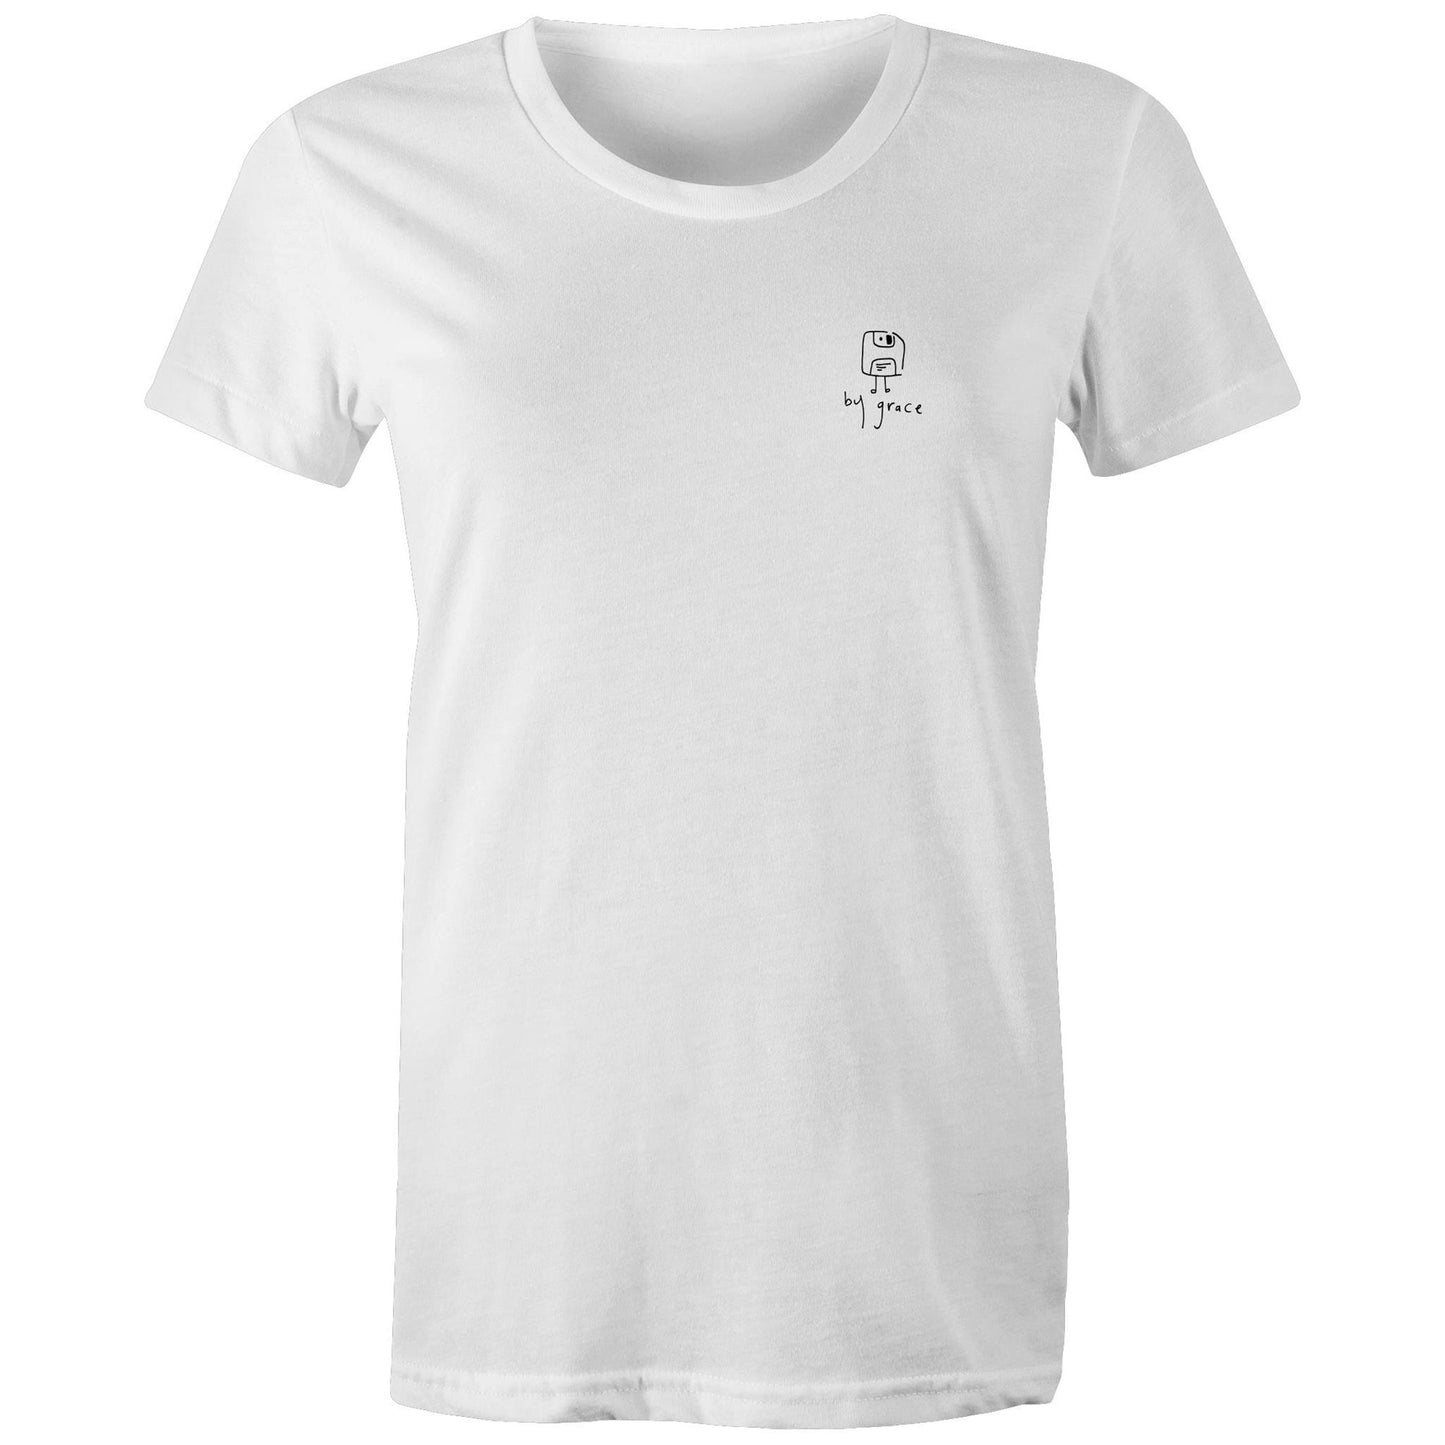 saved by grace (pocket) - girls tee